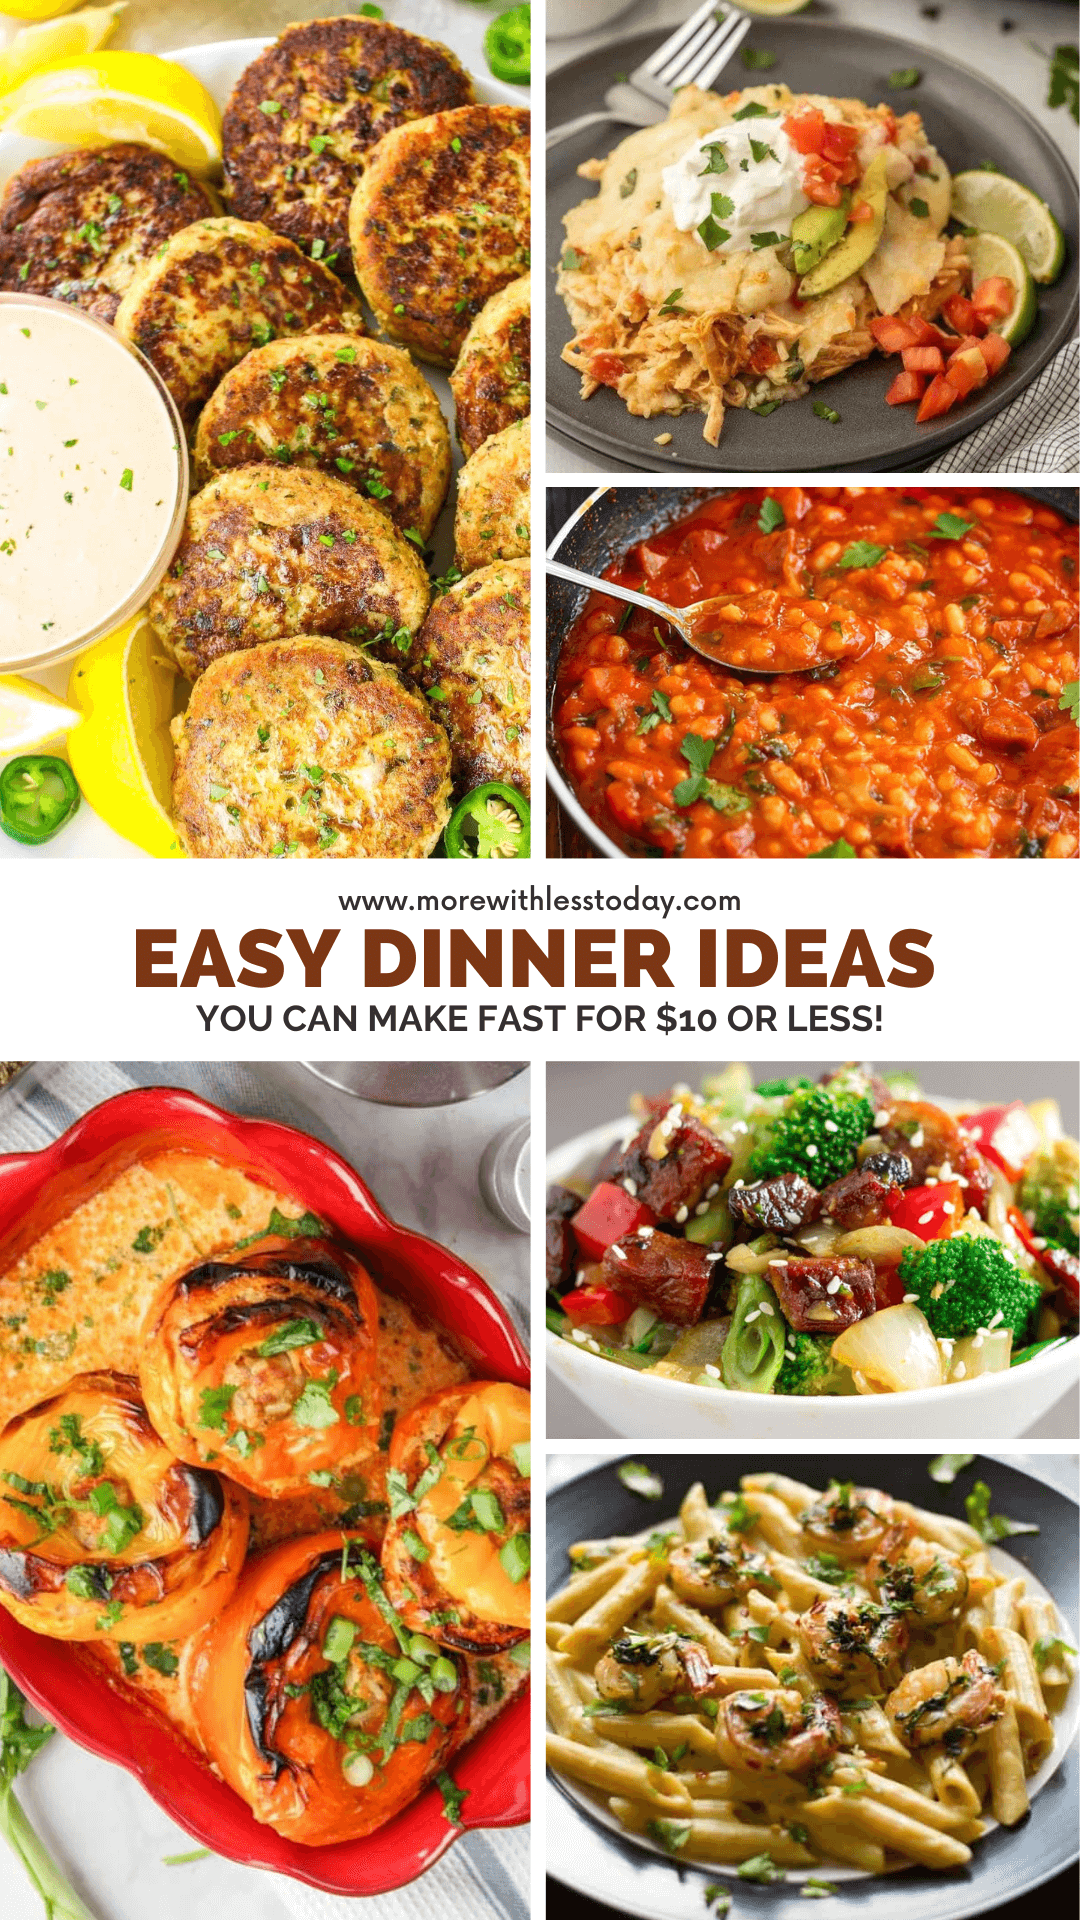 Easy Dinner Ideas You Can Make Fast for $10 or Less - PIN